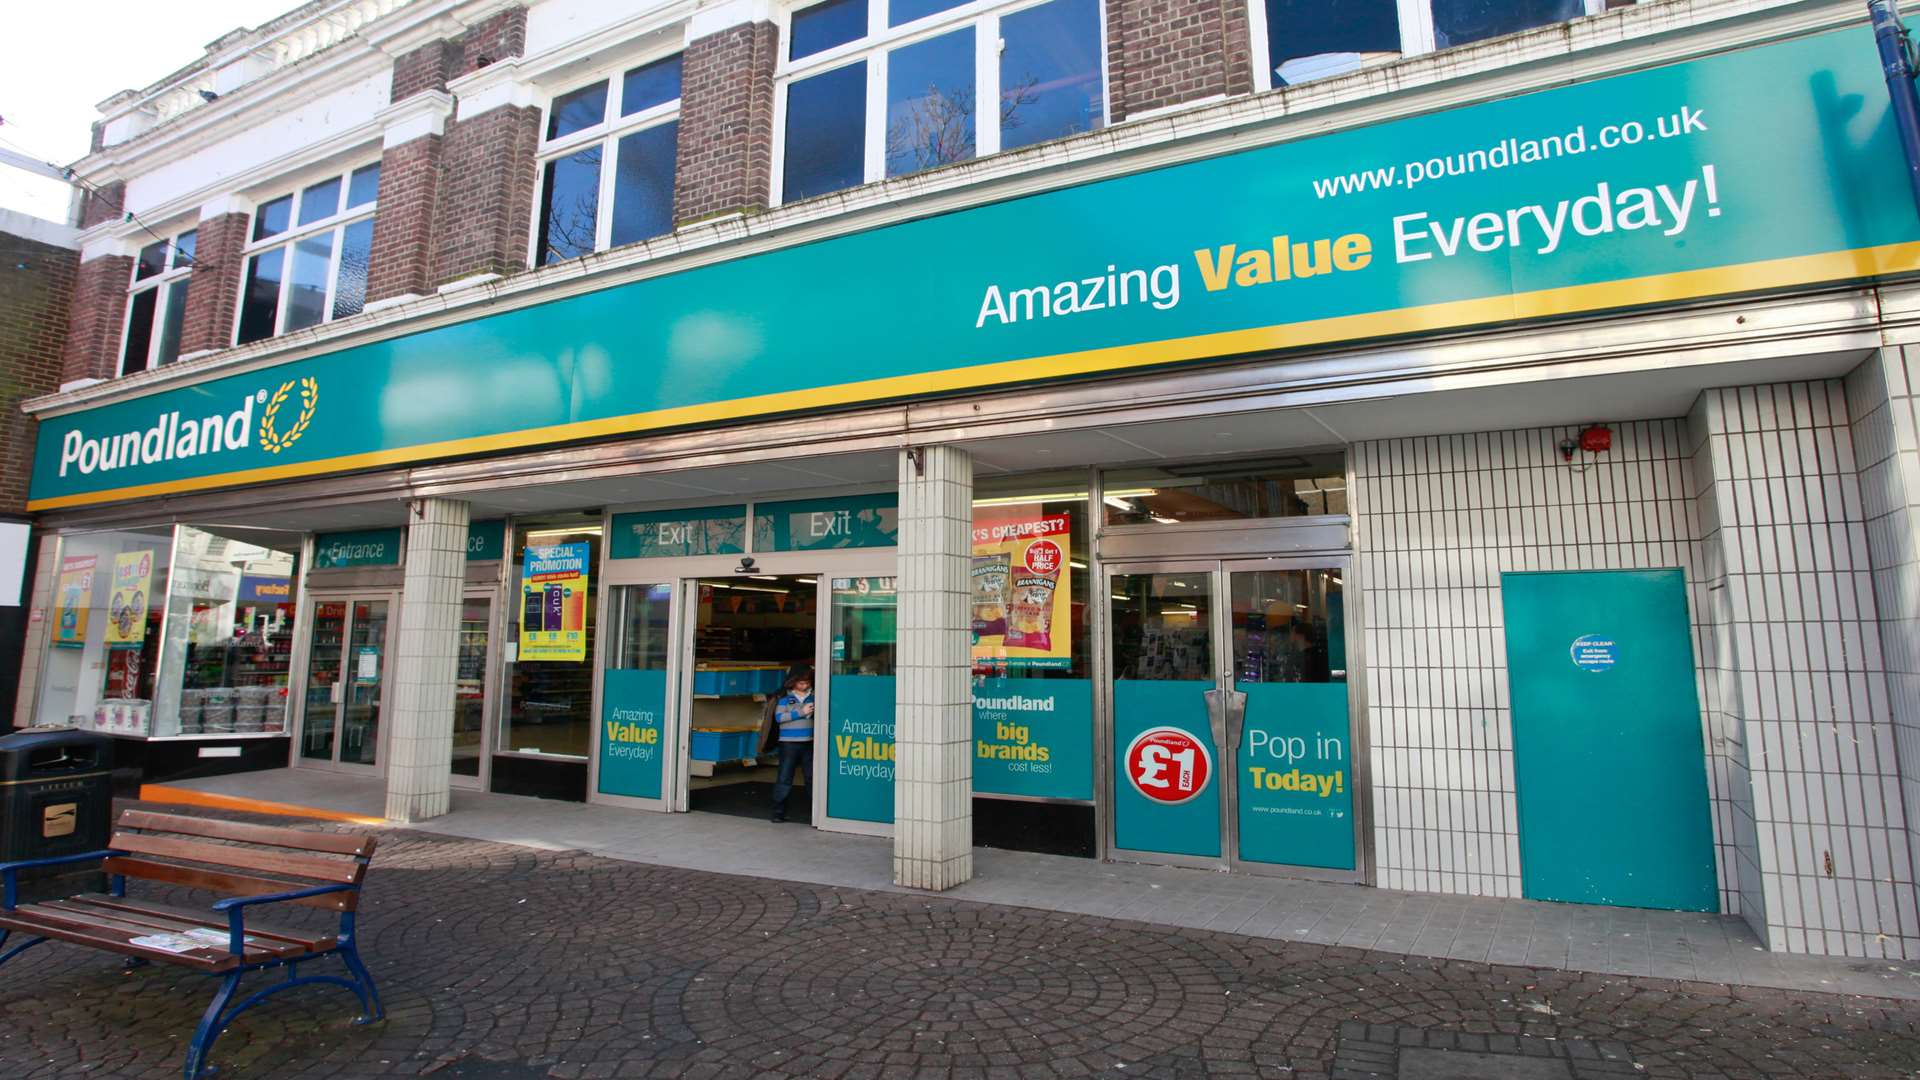 A new Poundland opened in Ramsgate High Street on February13